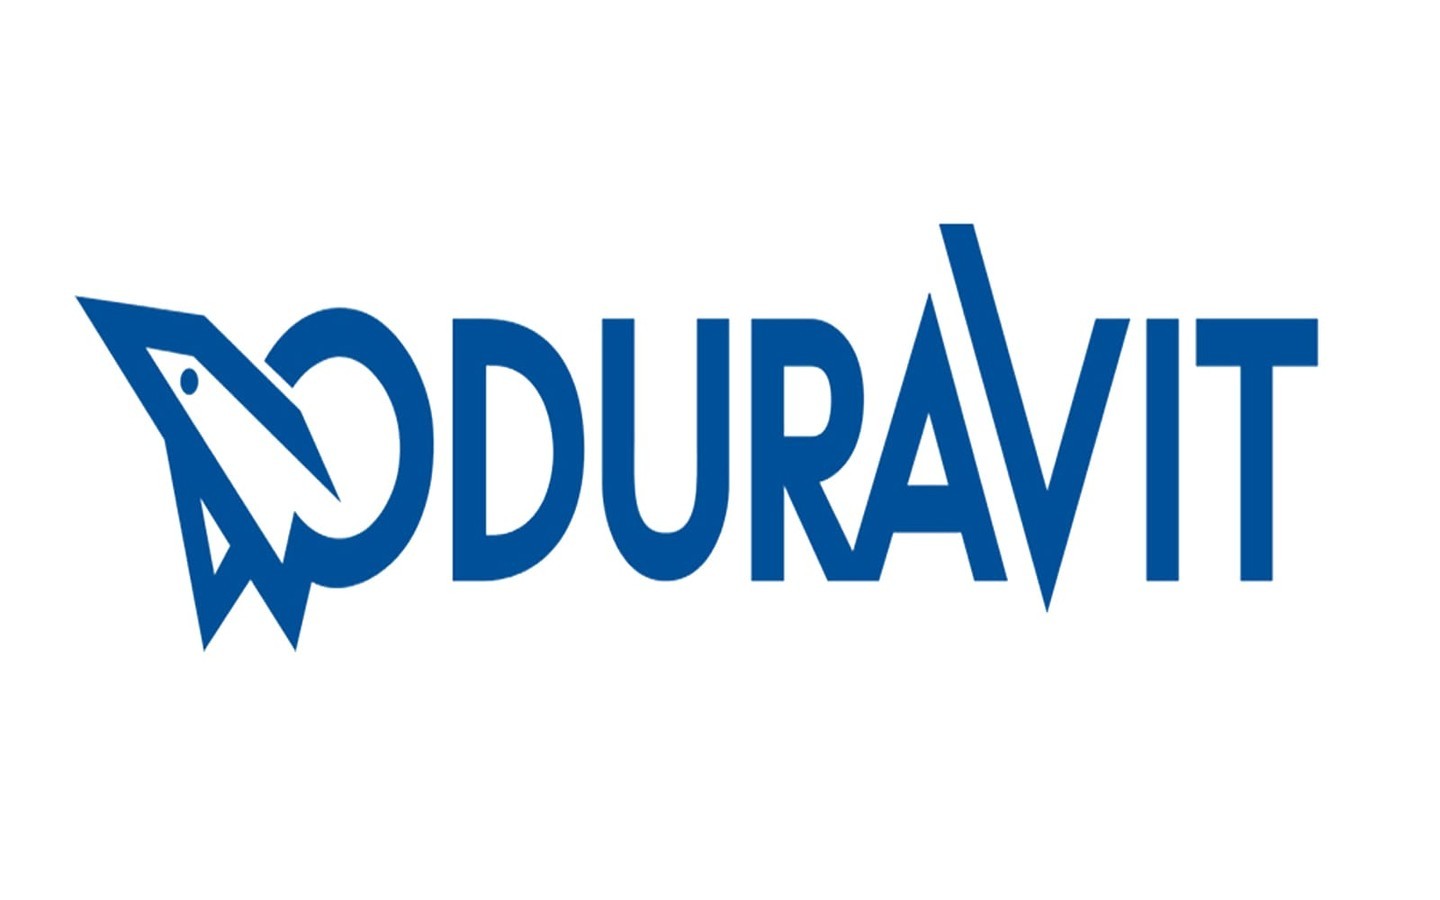 ASA Member History Highlight! @duravit has been supplying quality home bathroom appliances for over 200 years! Read some more of their amazing history here! #history #ASA #supply #appliance
https://www.duravit.us/service/company/history.us-en.html